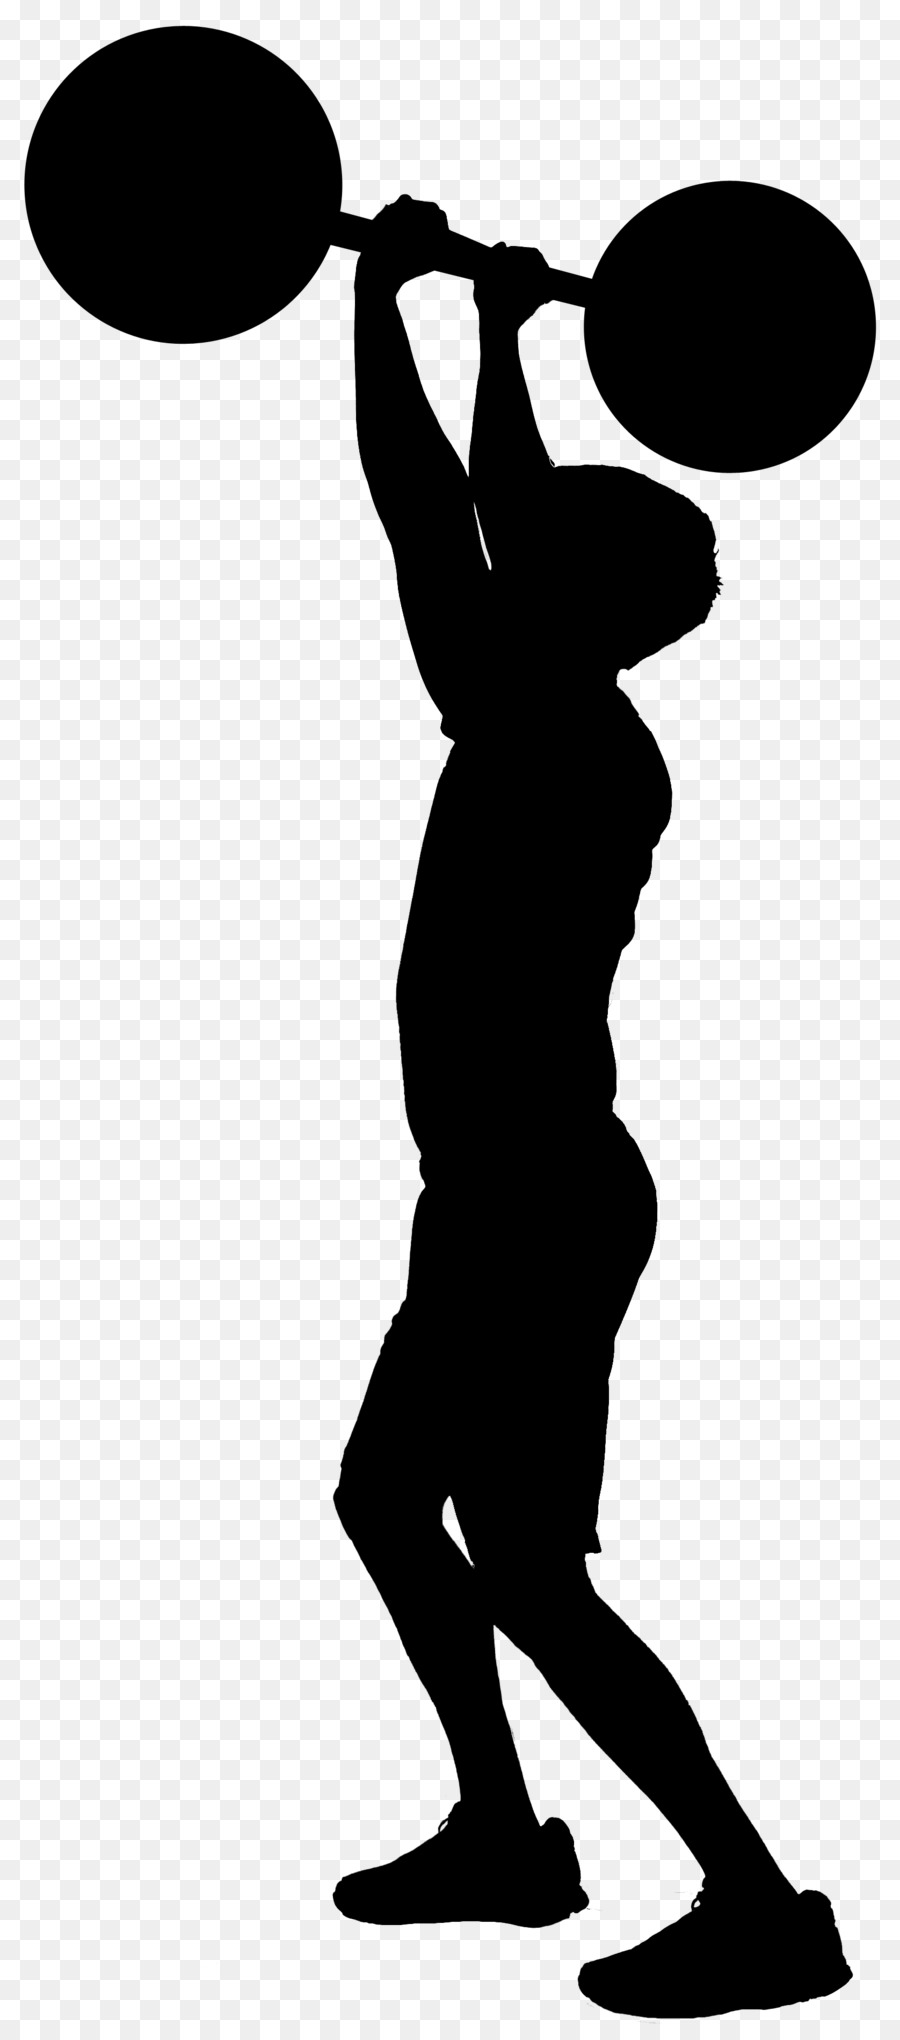 Exercise Silhouette Endurance Athlete Fitness Centre - weightlifting png download - 1676*3785 - Free Transparent Exercise png Download.